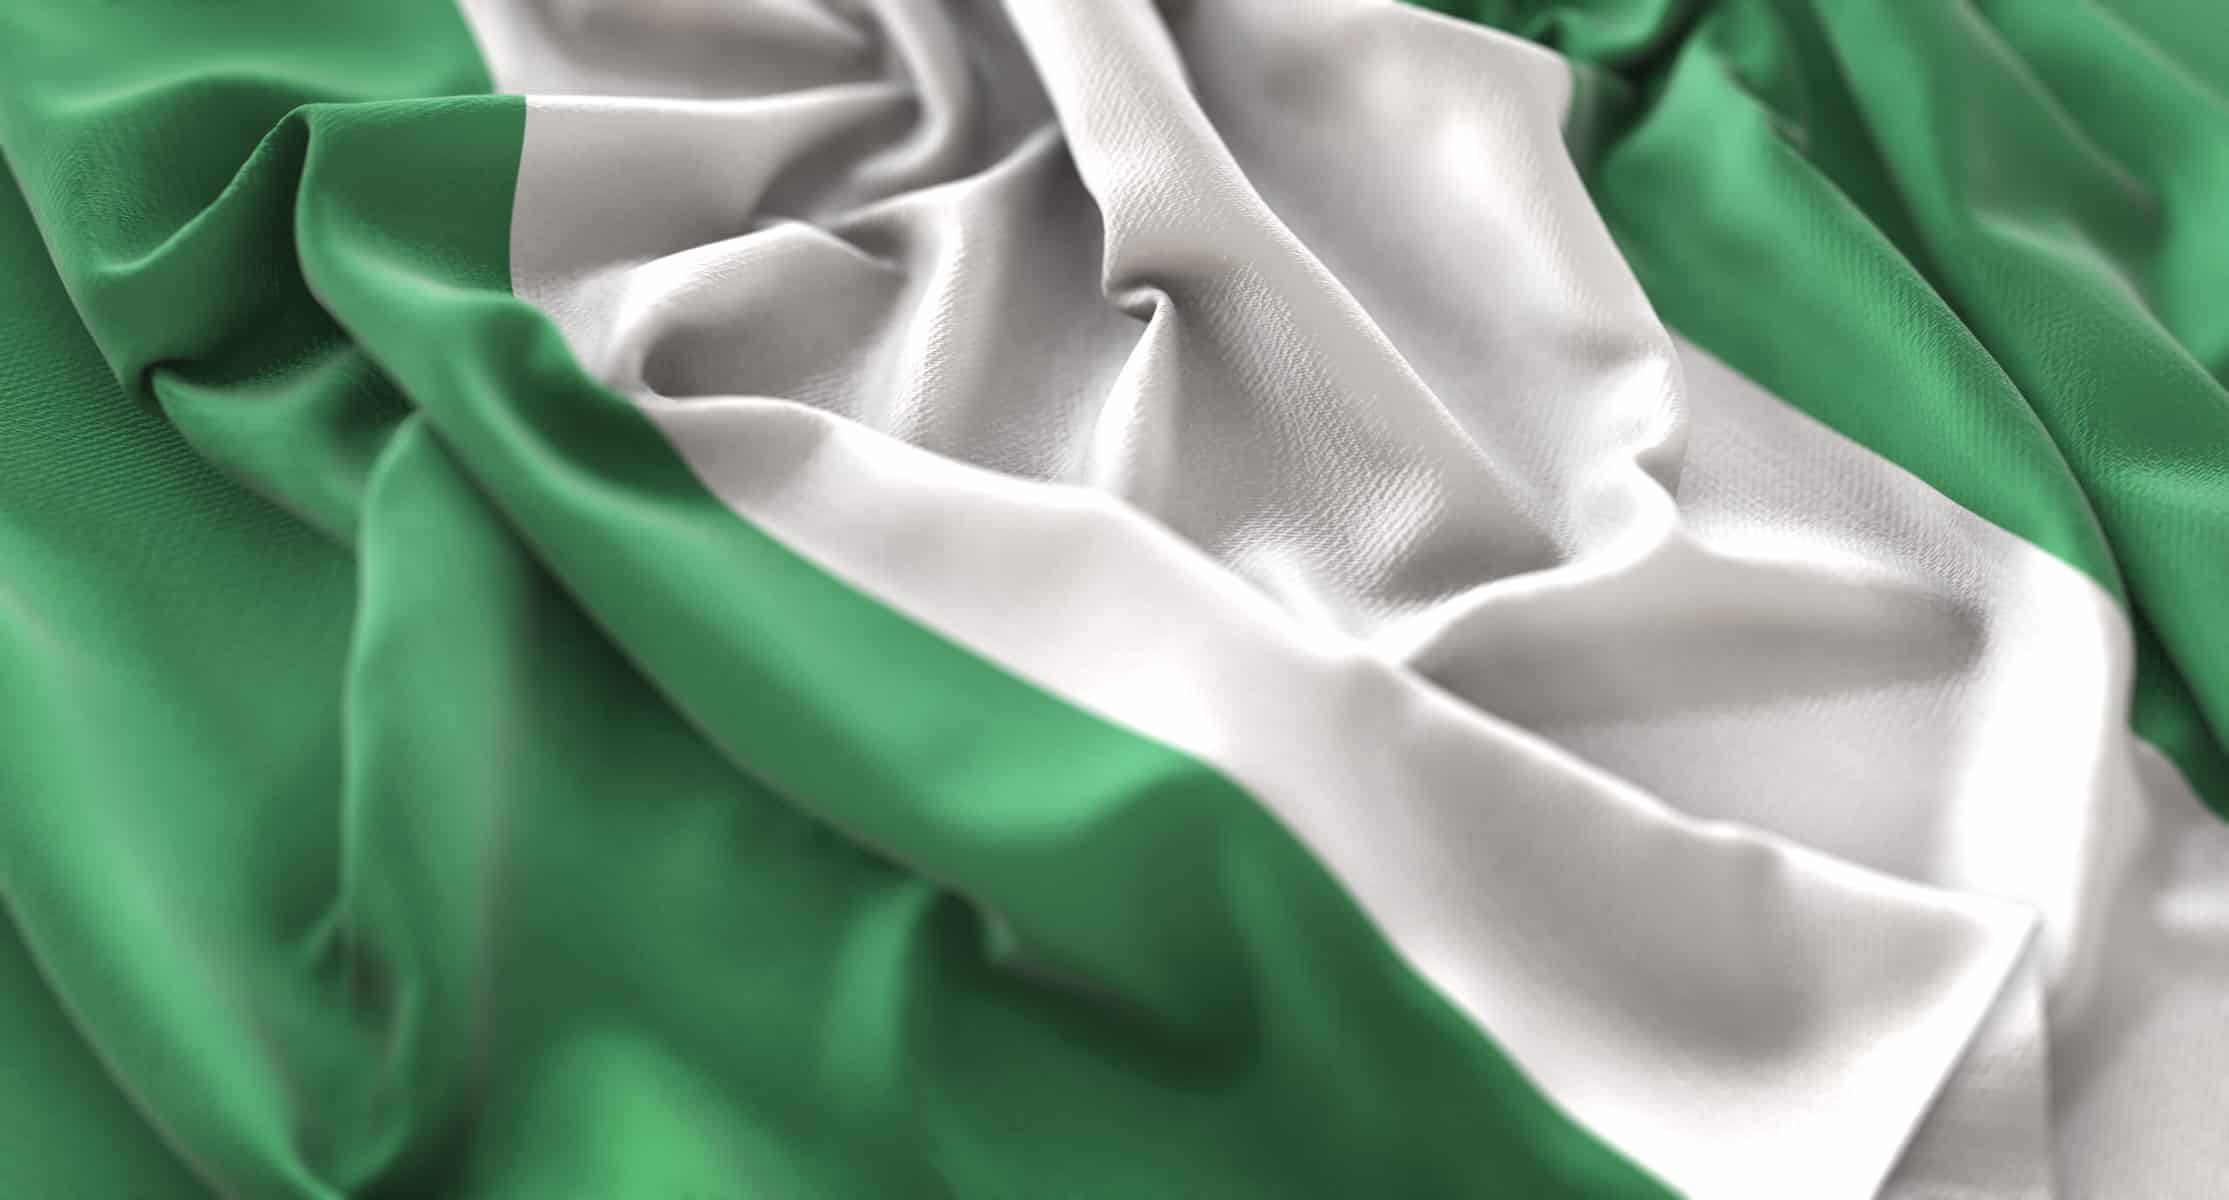 A green and white Nigerian flag is seen loosely crumpled on a flat surface.